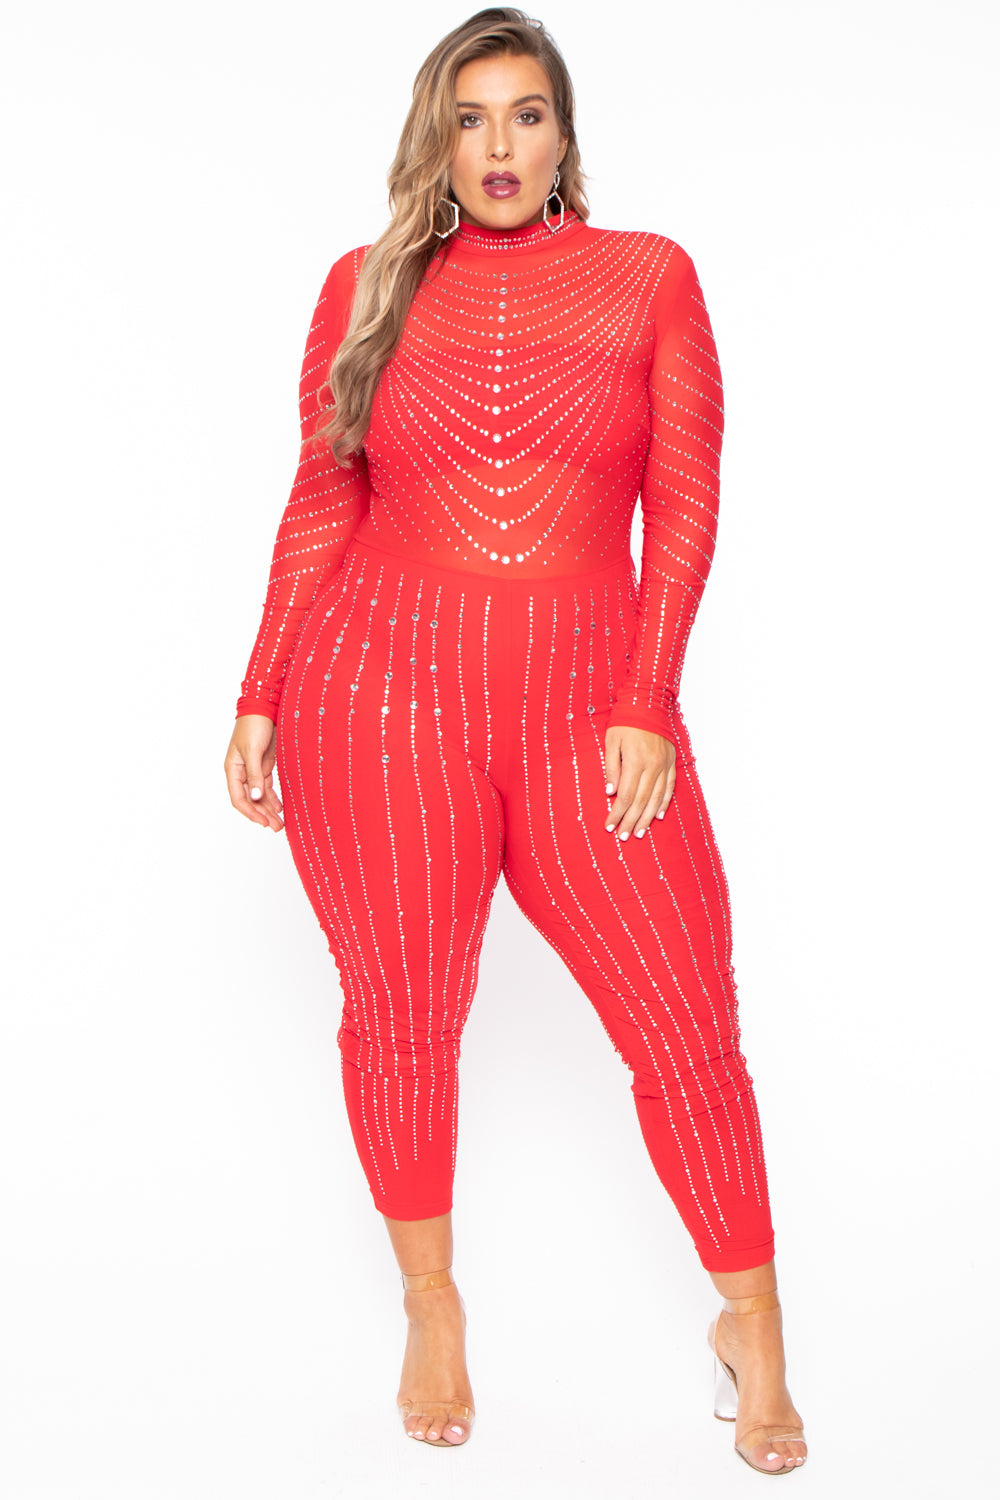 J OUR Jumpsuits and Rompers 1X / Red Plus Size 14K Sheer Mesh Rhinestone Jumpsuit - Red